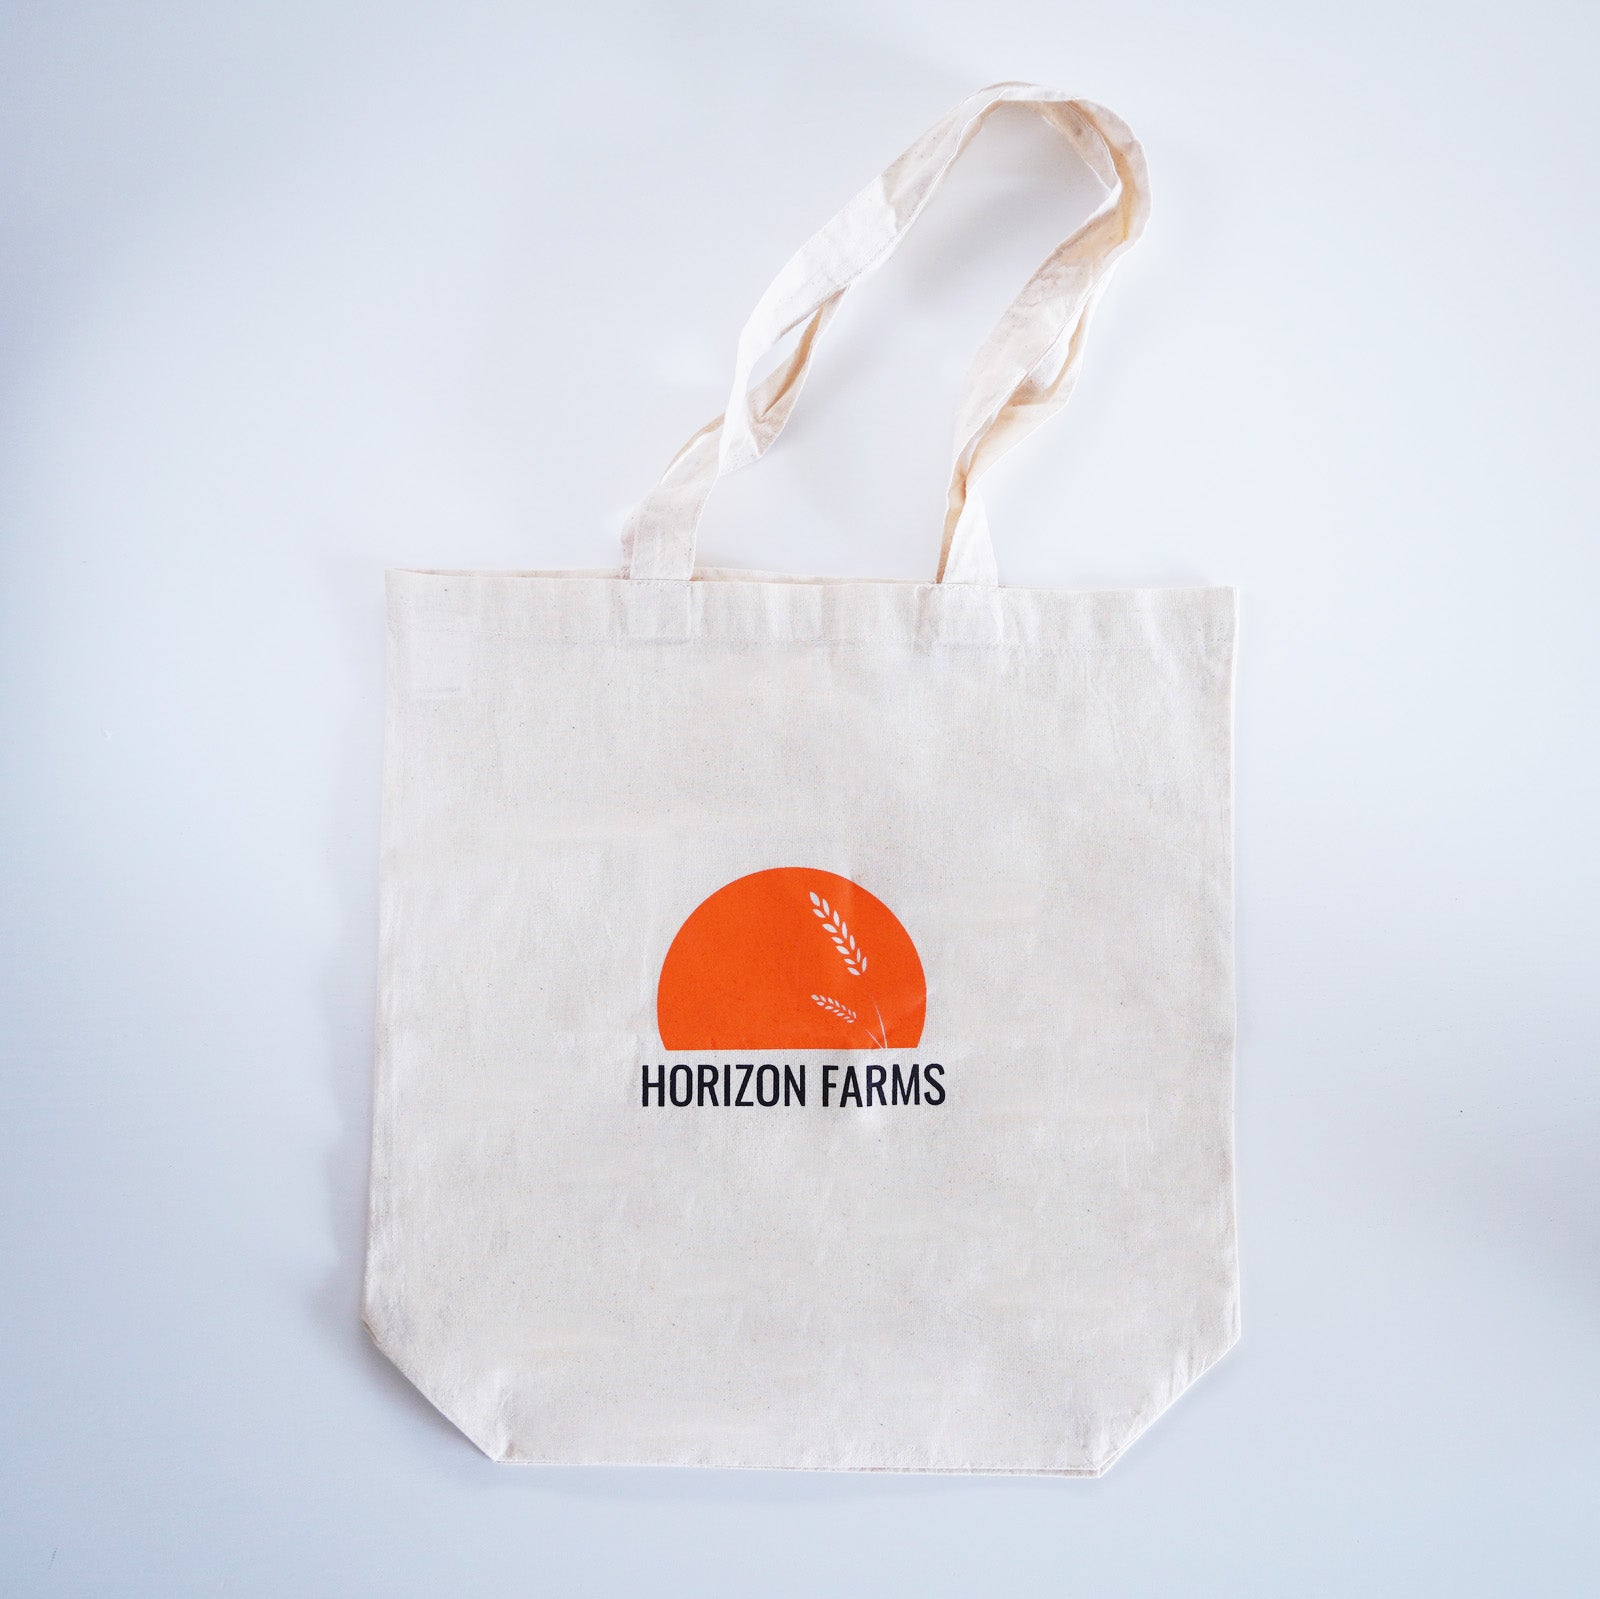 Original Compact Eco Tote Bag 100% Organic Cotton Unbleached (Also Available For Free!) - Horizon Farms